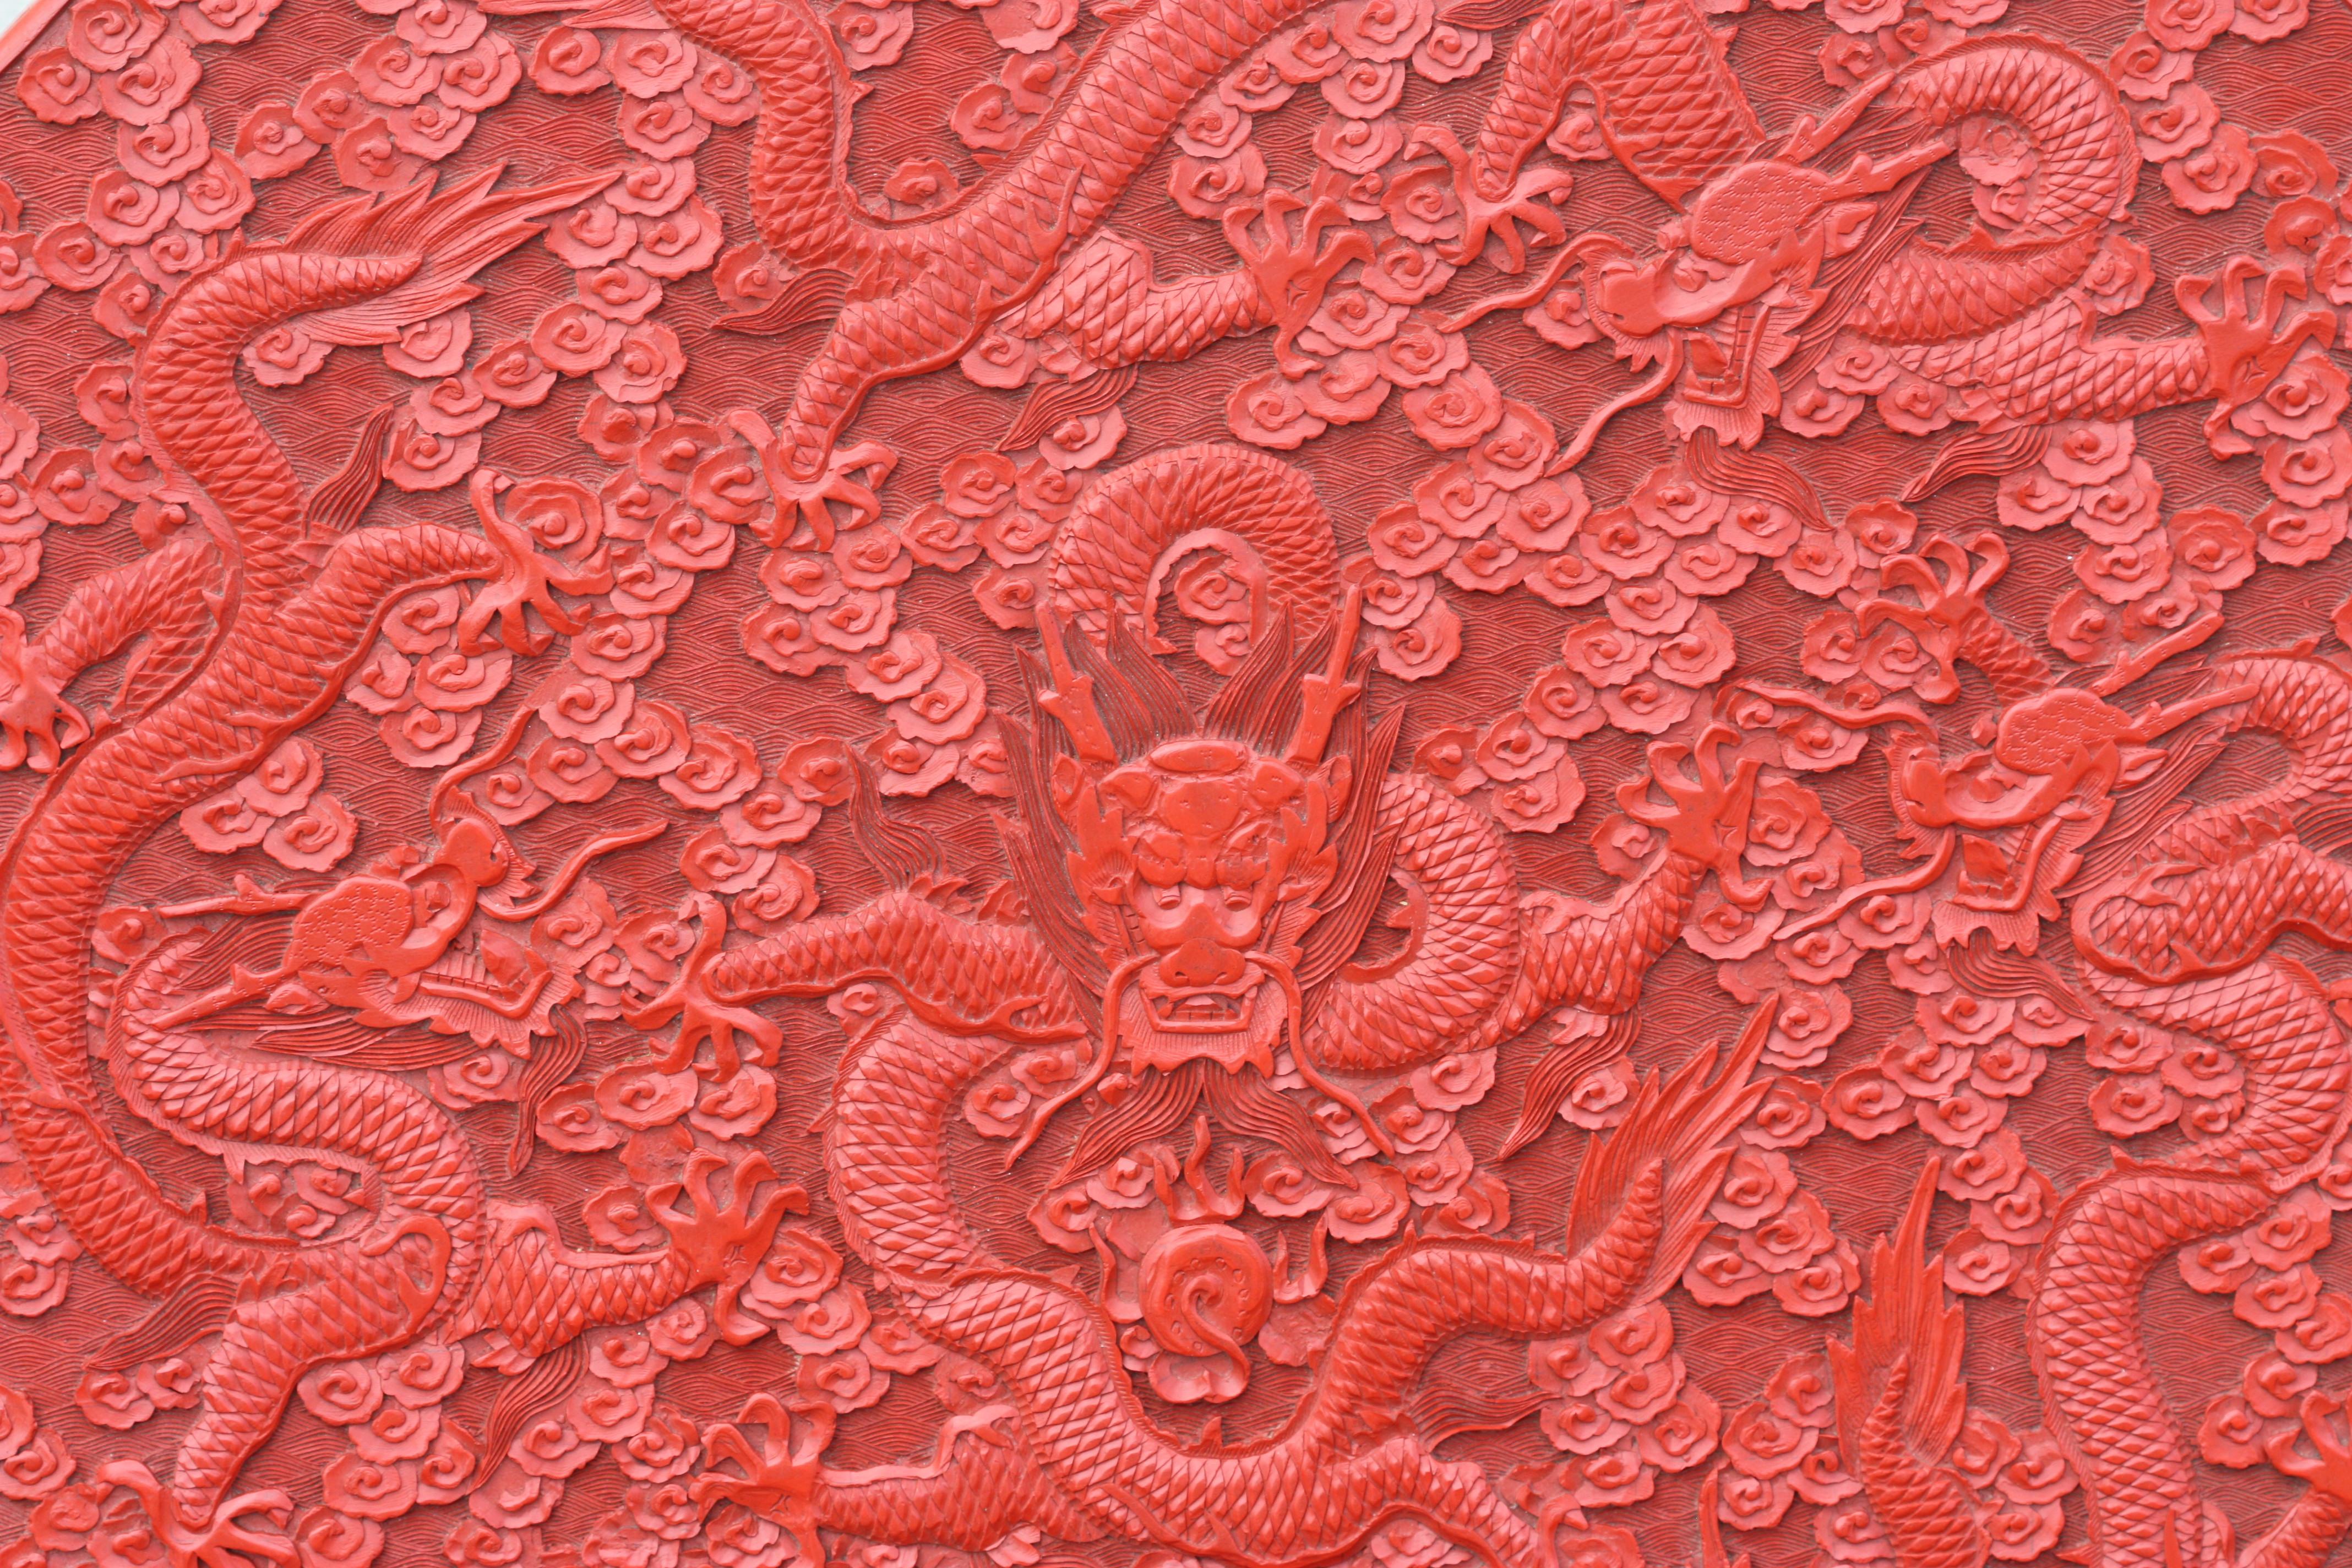 Large and Impressive Chinese Cinnabar Lacquer 